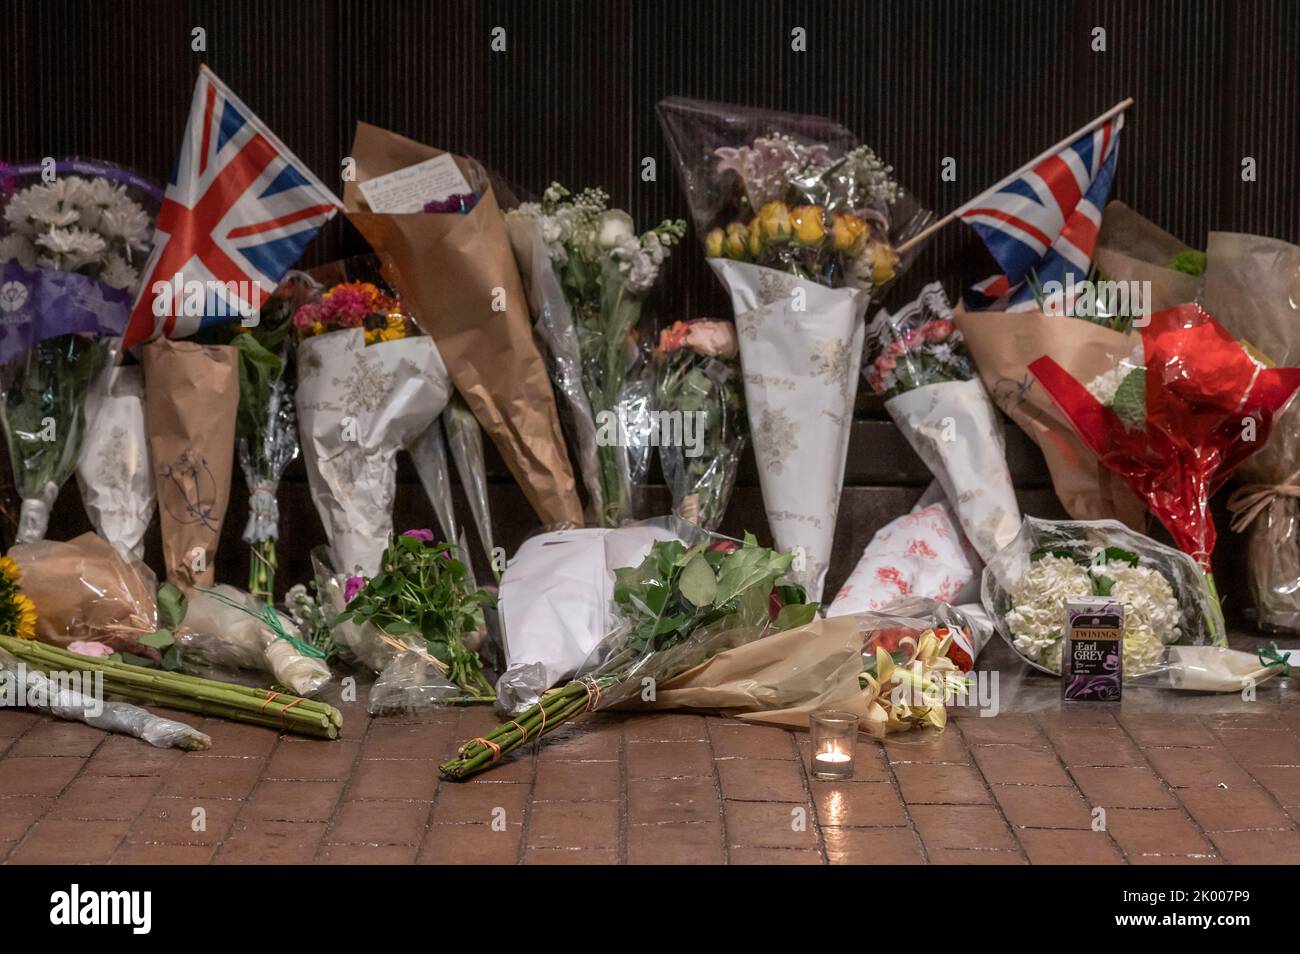 NEW YORK, NEW YORK - SEPTEMBER 08: Floral tributes, candles and British flags for Her Majesty Queen Elizabeth II are seen outside of The British Consulate General in New York on September 8, 2022 in New York City. According to a statement issued by Buckingham Palace on 08 September 2022, Britain's Queen Elizabeth II has died at her Scottish estate, Balmoral Castle, on 08 September 2022. The 96-year-old Queen was the longest-reigning monarch in British history. Stock Photo